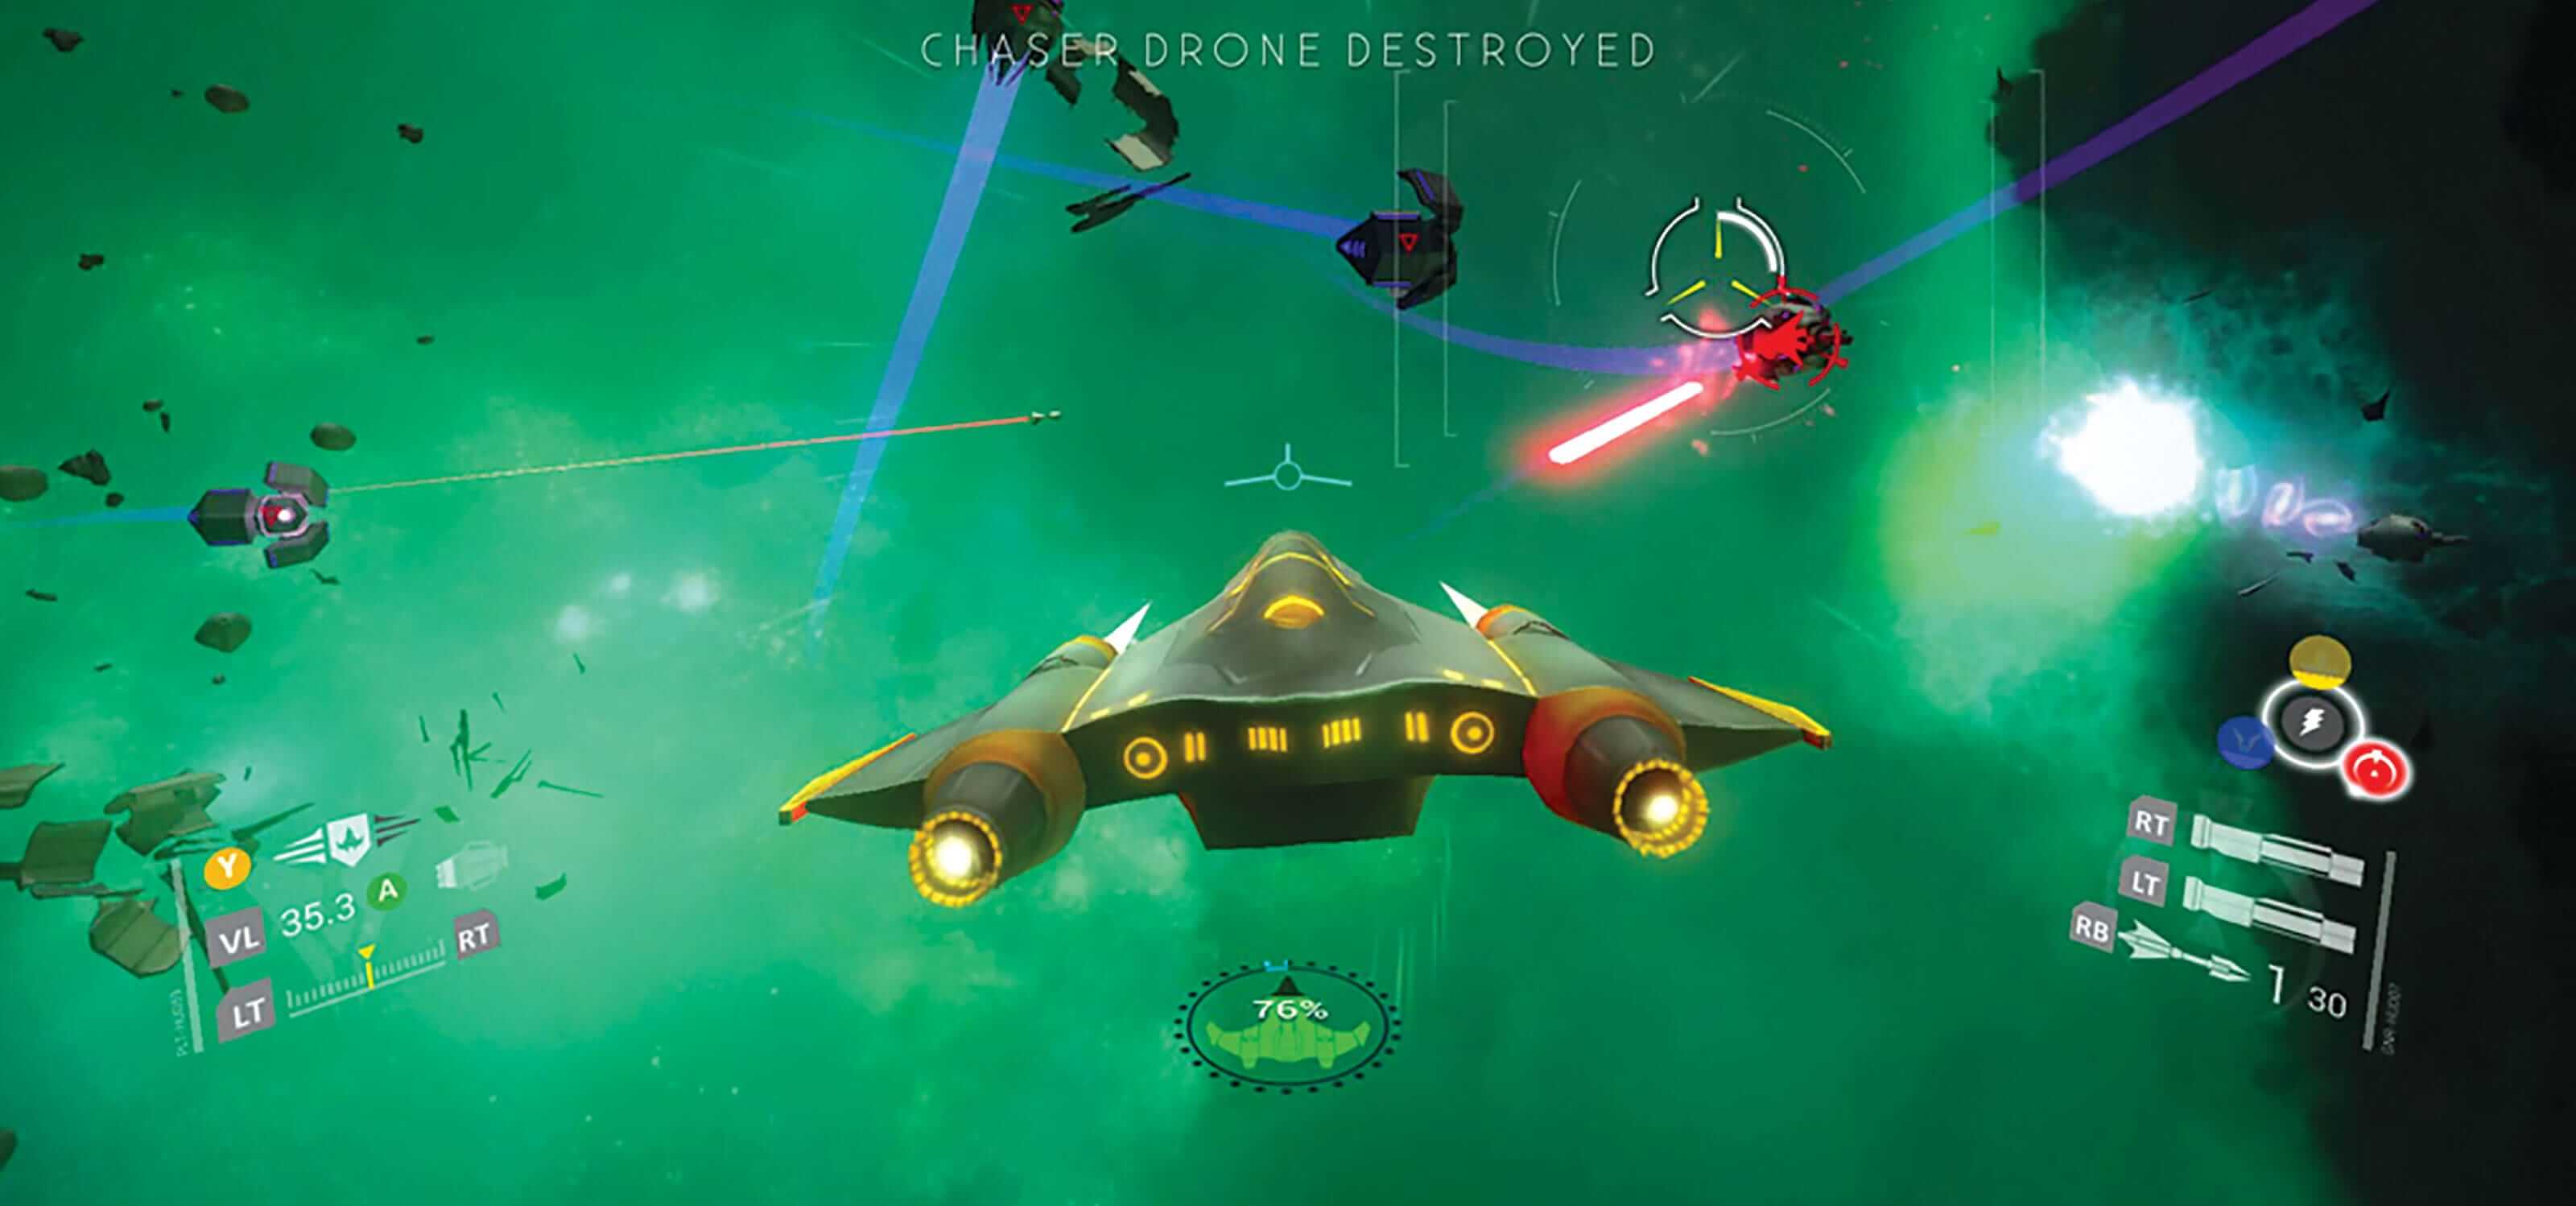 The player's spacecraft dodges an enemy's red laser bolt against a green-tinged background